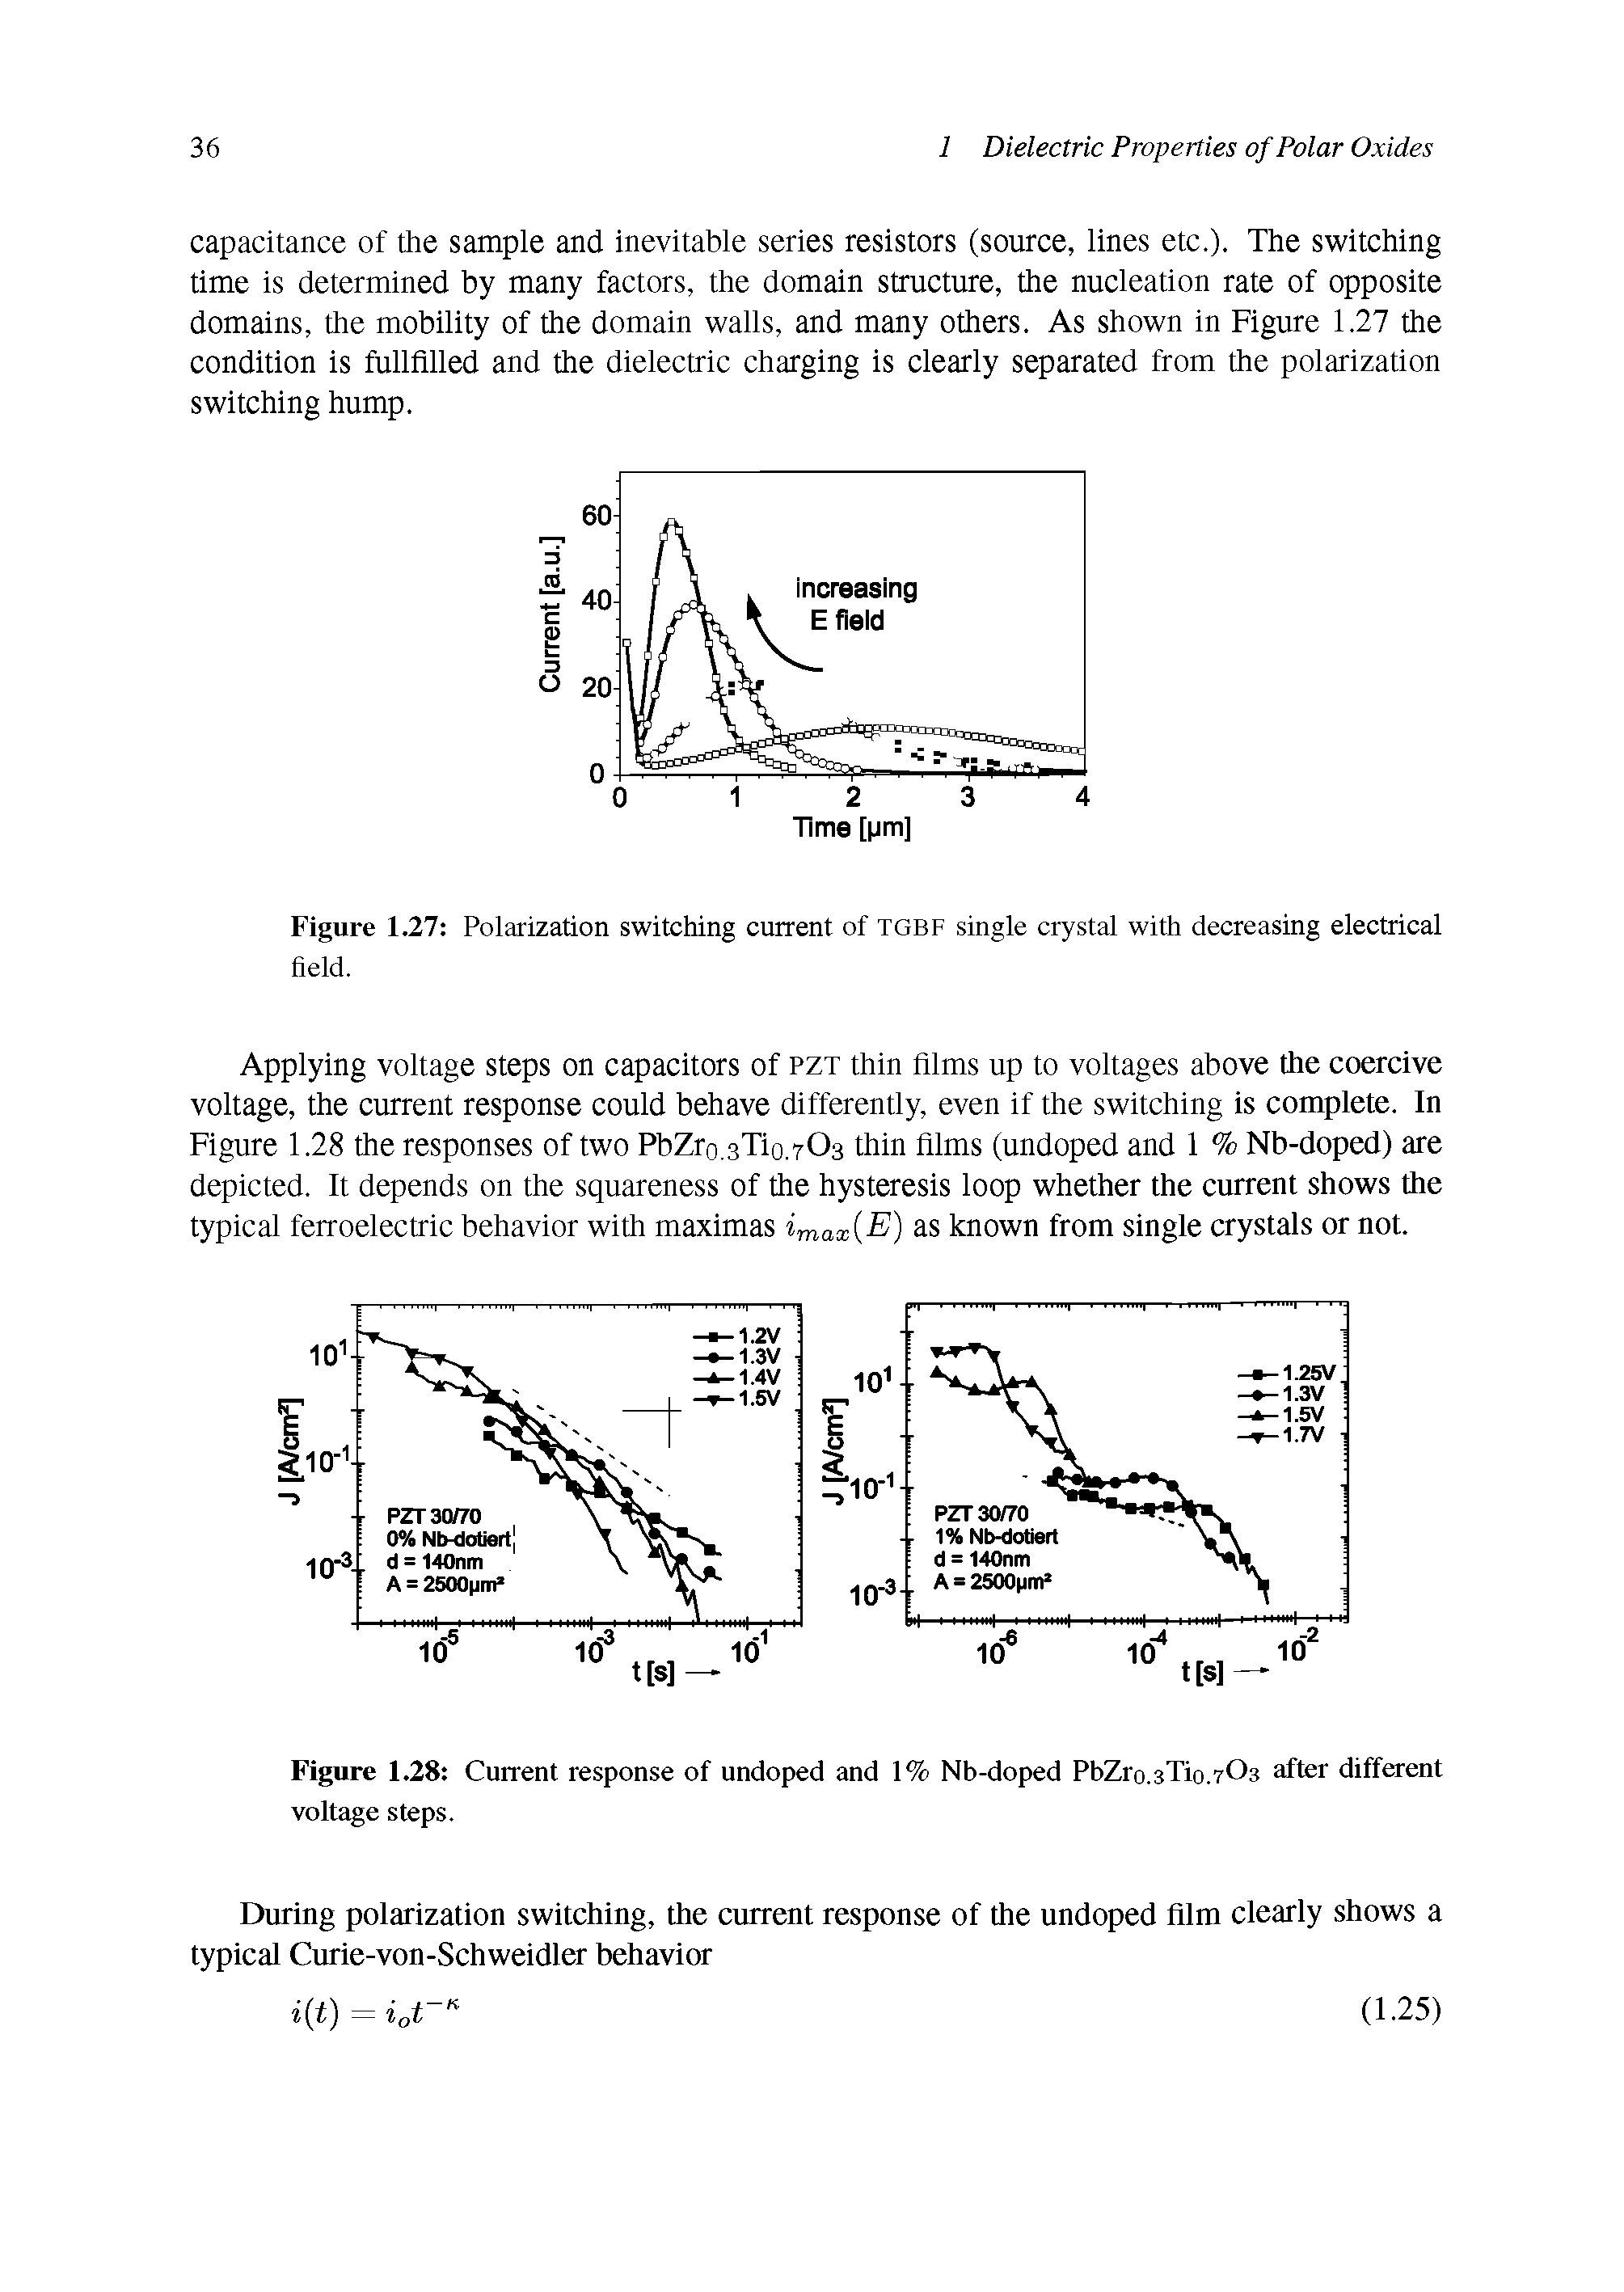 Figure 1.27 Polarization switching current of TGBF single crystal with decreasing electrical field.